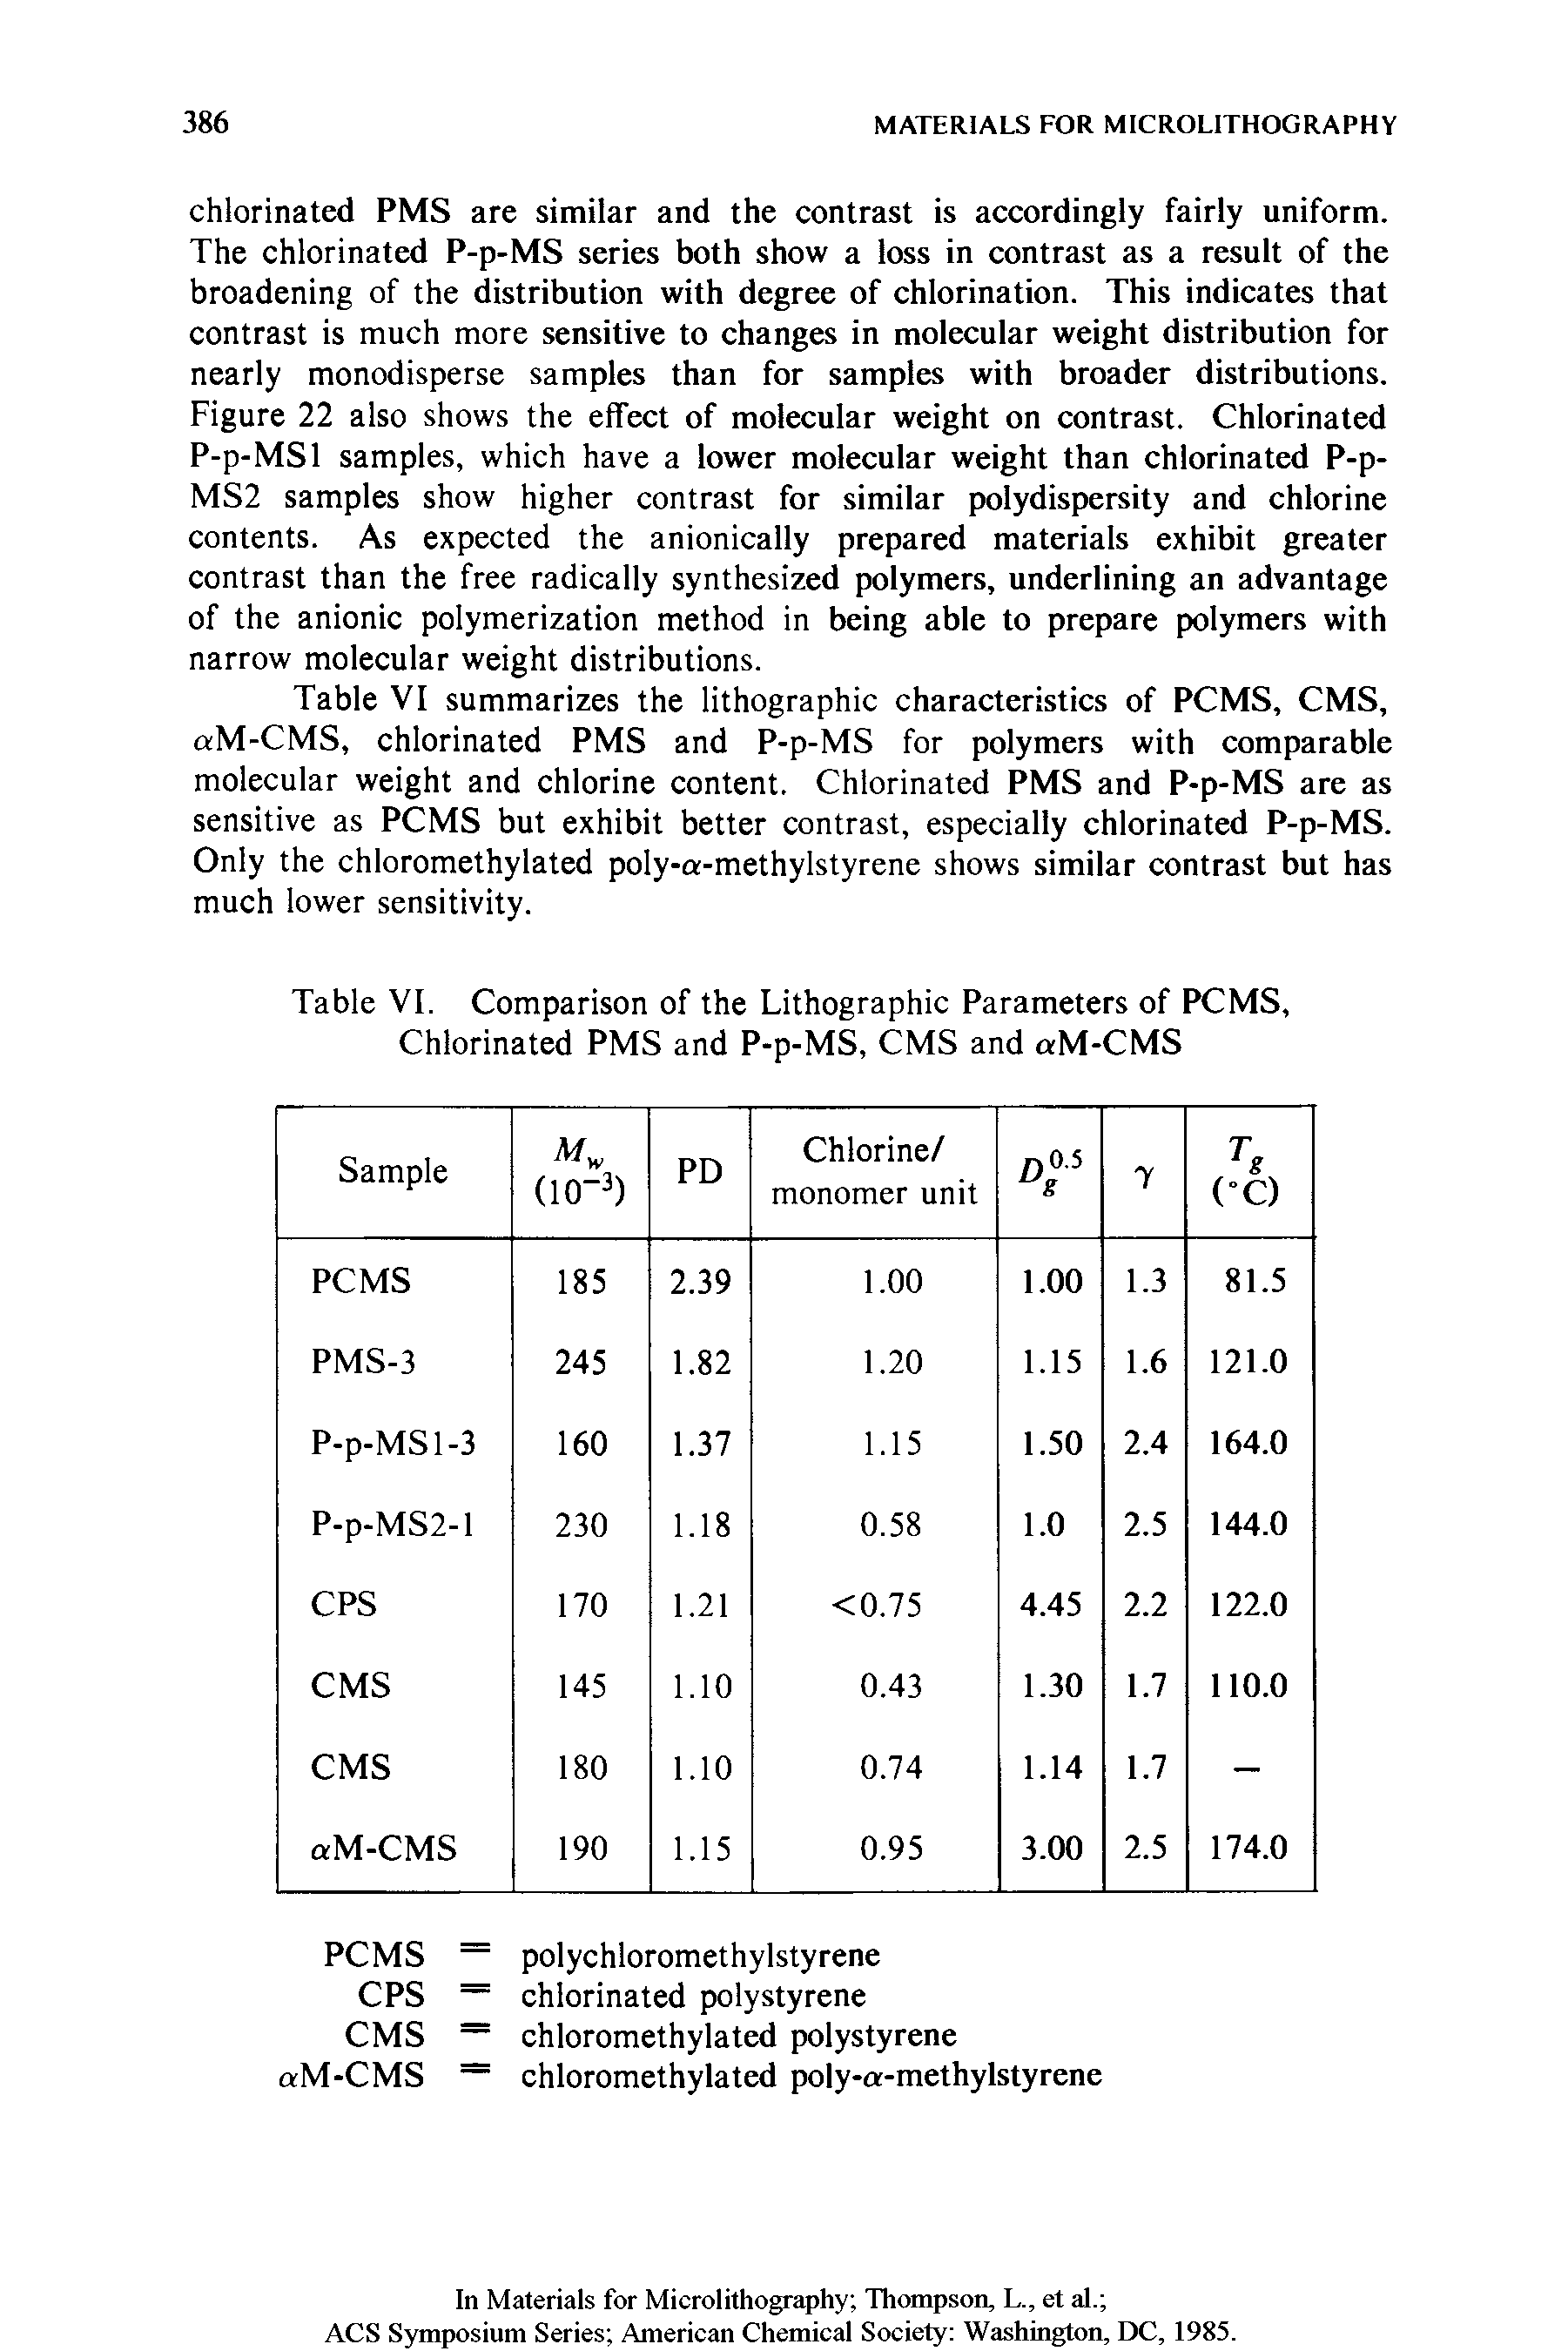 Table VI summarizes the lithographic characteristics of PCMS, CMS, aM-CMS, chlorinated PMS and P-p-MS for polymers with comparable molecular weight and chlorine content. Chlorinated PMS and P-p-MS are as sensitive as PCMS but exhibit better contrast, especially chlorinated P-p-MS. Only the chloromethylated poly-a-methylstyrene shows similar contrast but has much lower sensitivity.